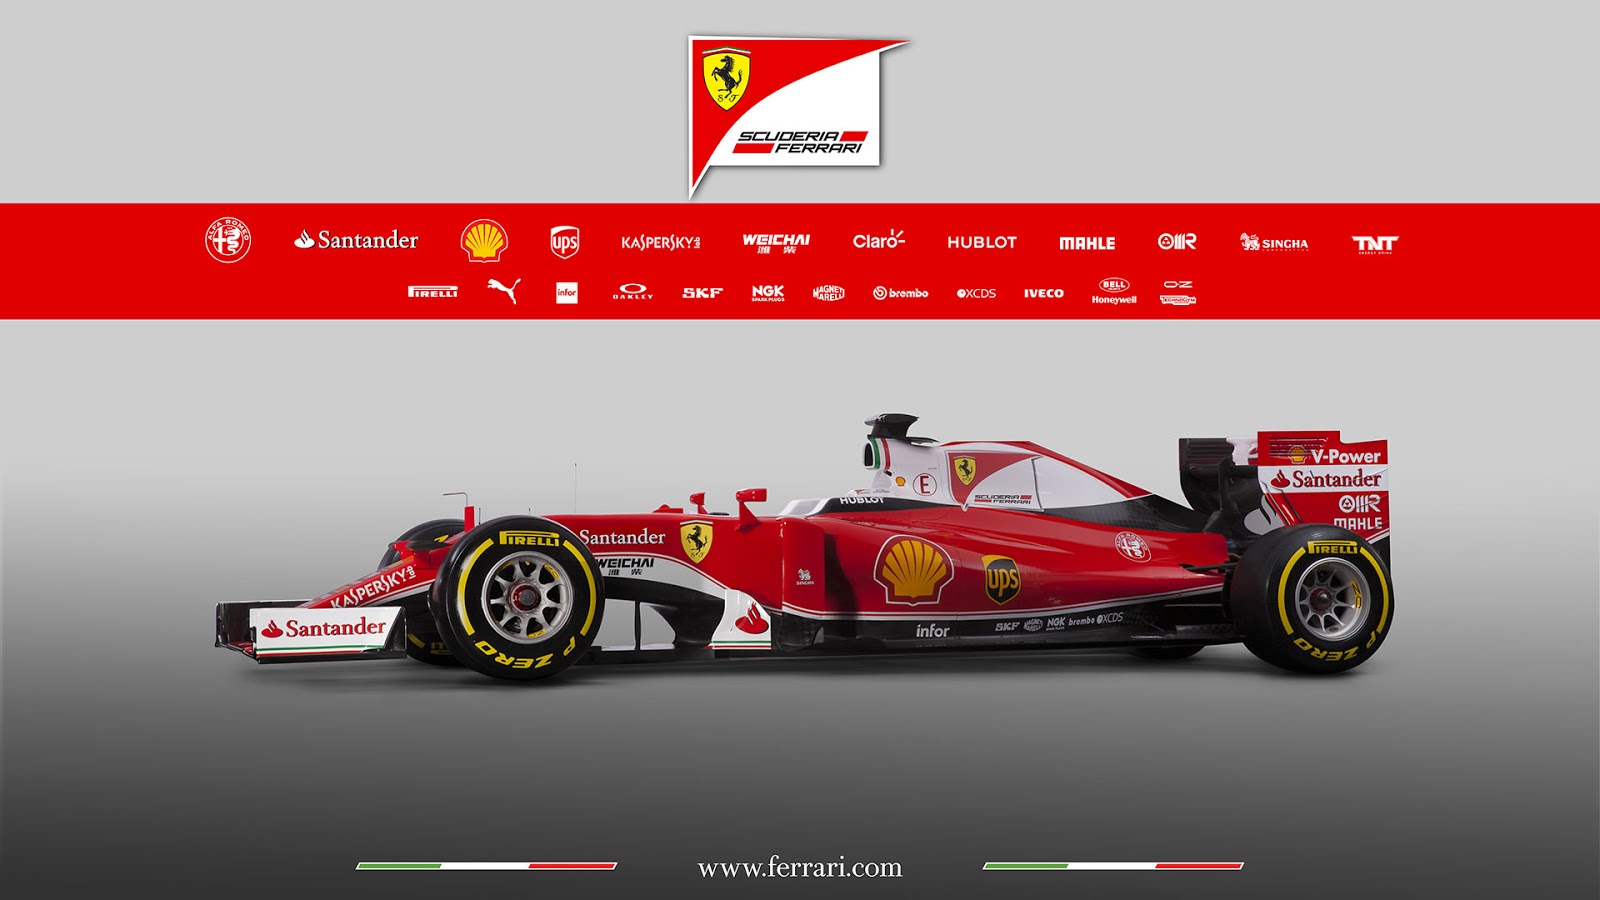 F1 Wallpaper Will Be Updated Regularly During The Season